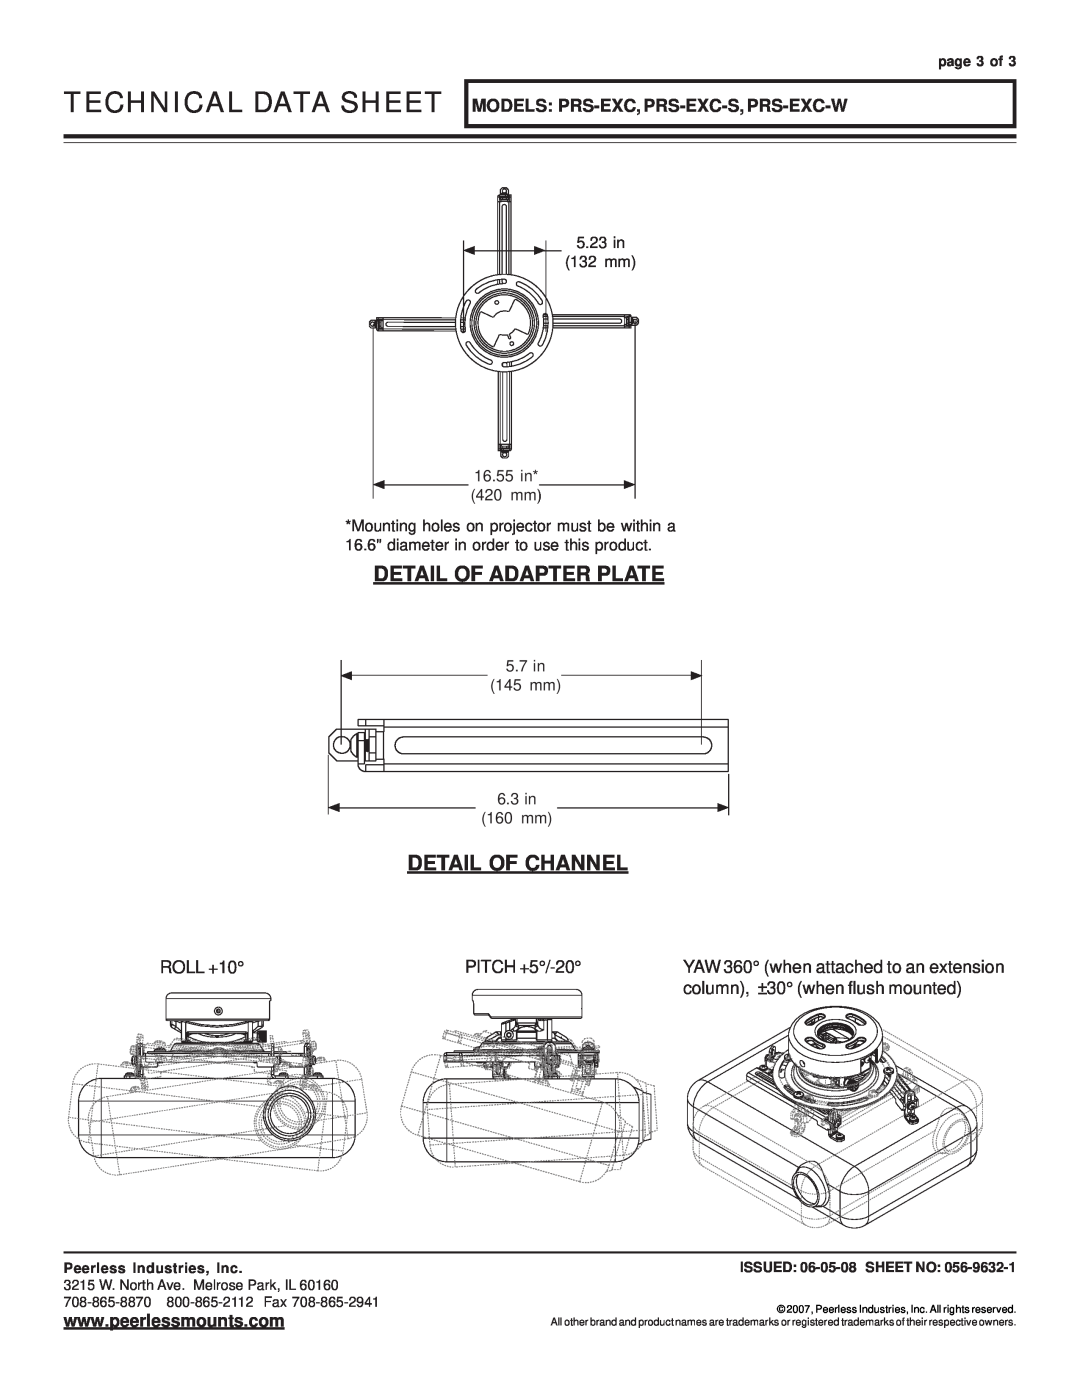 Peerless Industries PRS-EXC Technical Data Sheet, Detail Of Adapter Plate, Detail Of Channel, 5.7 in, 145 mm, page 3 of 